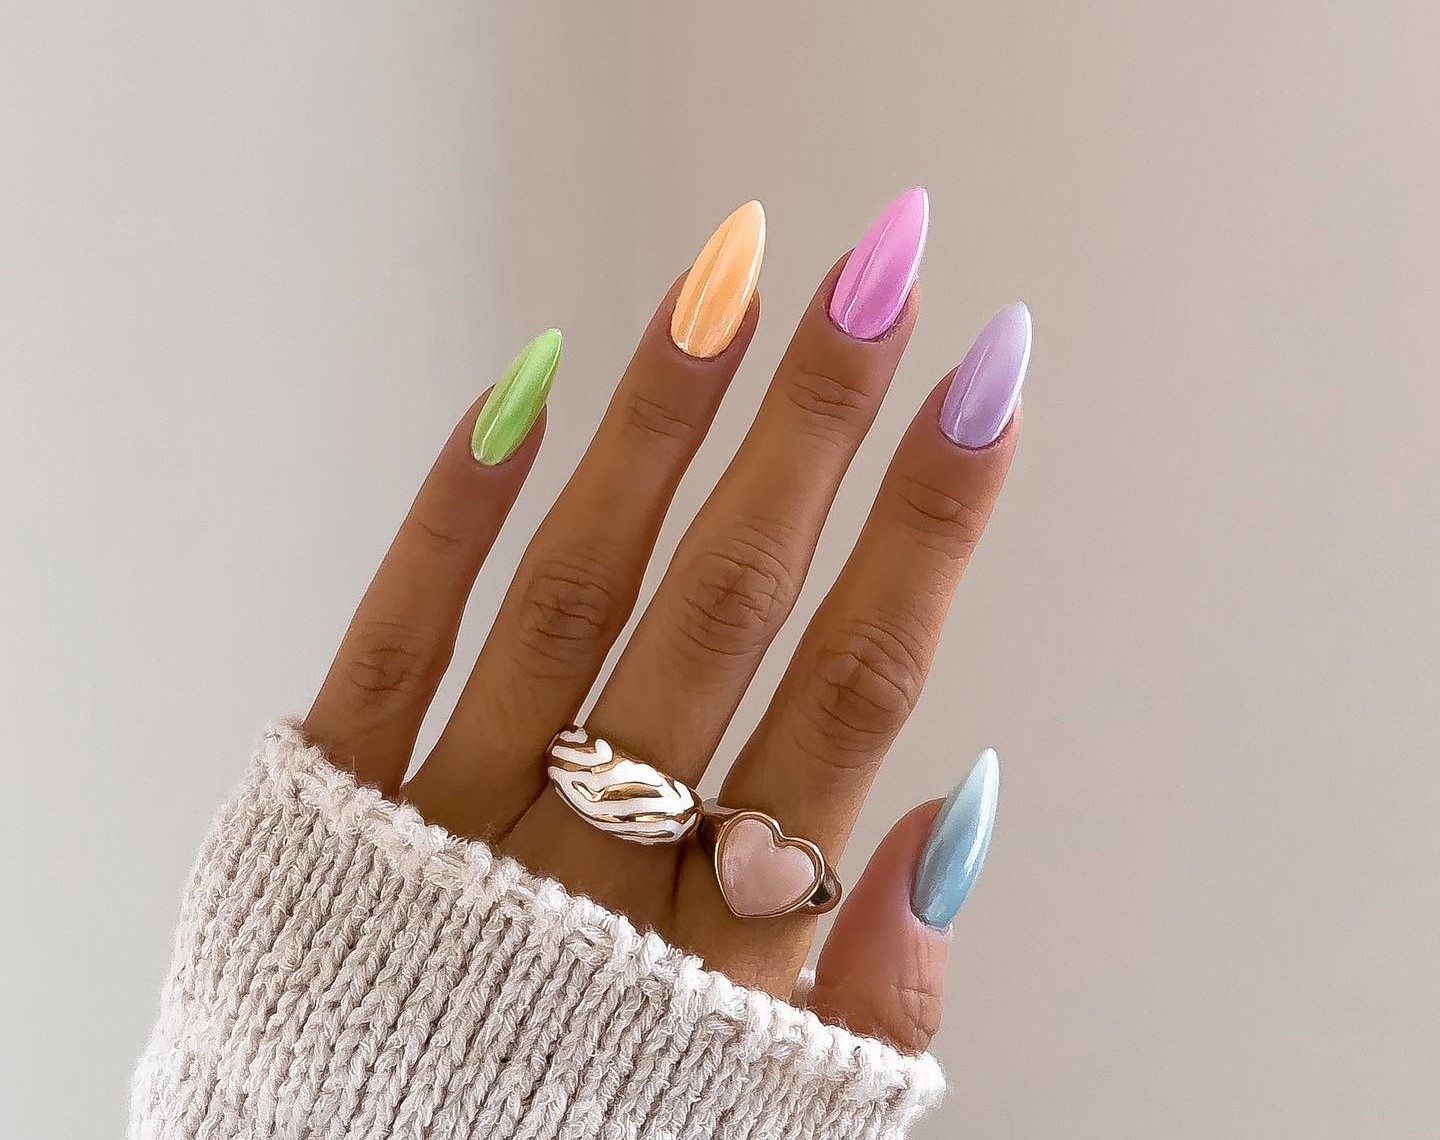 30+ Awesome Acrylic Nail Designs You'll WantCute DIY Projects